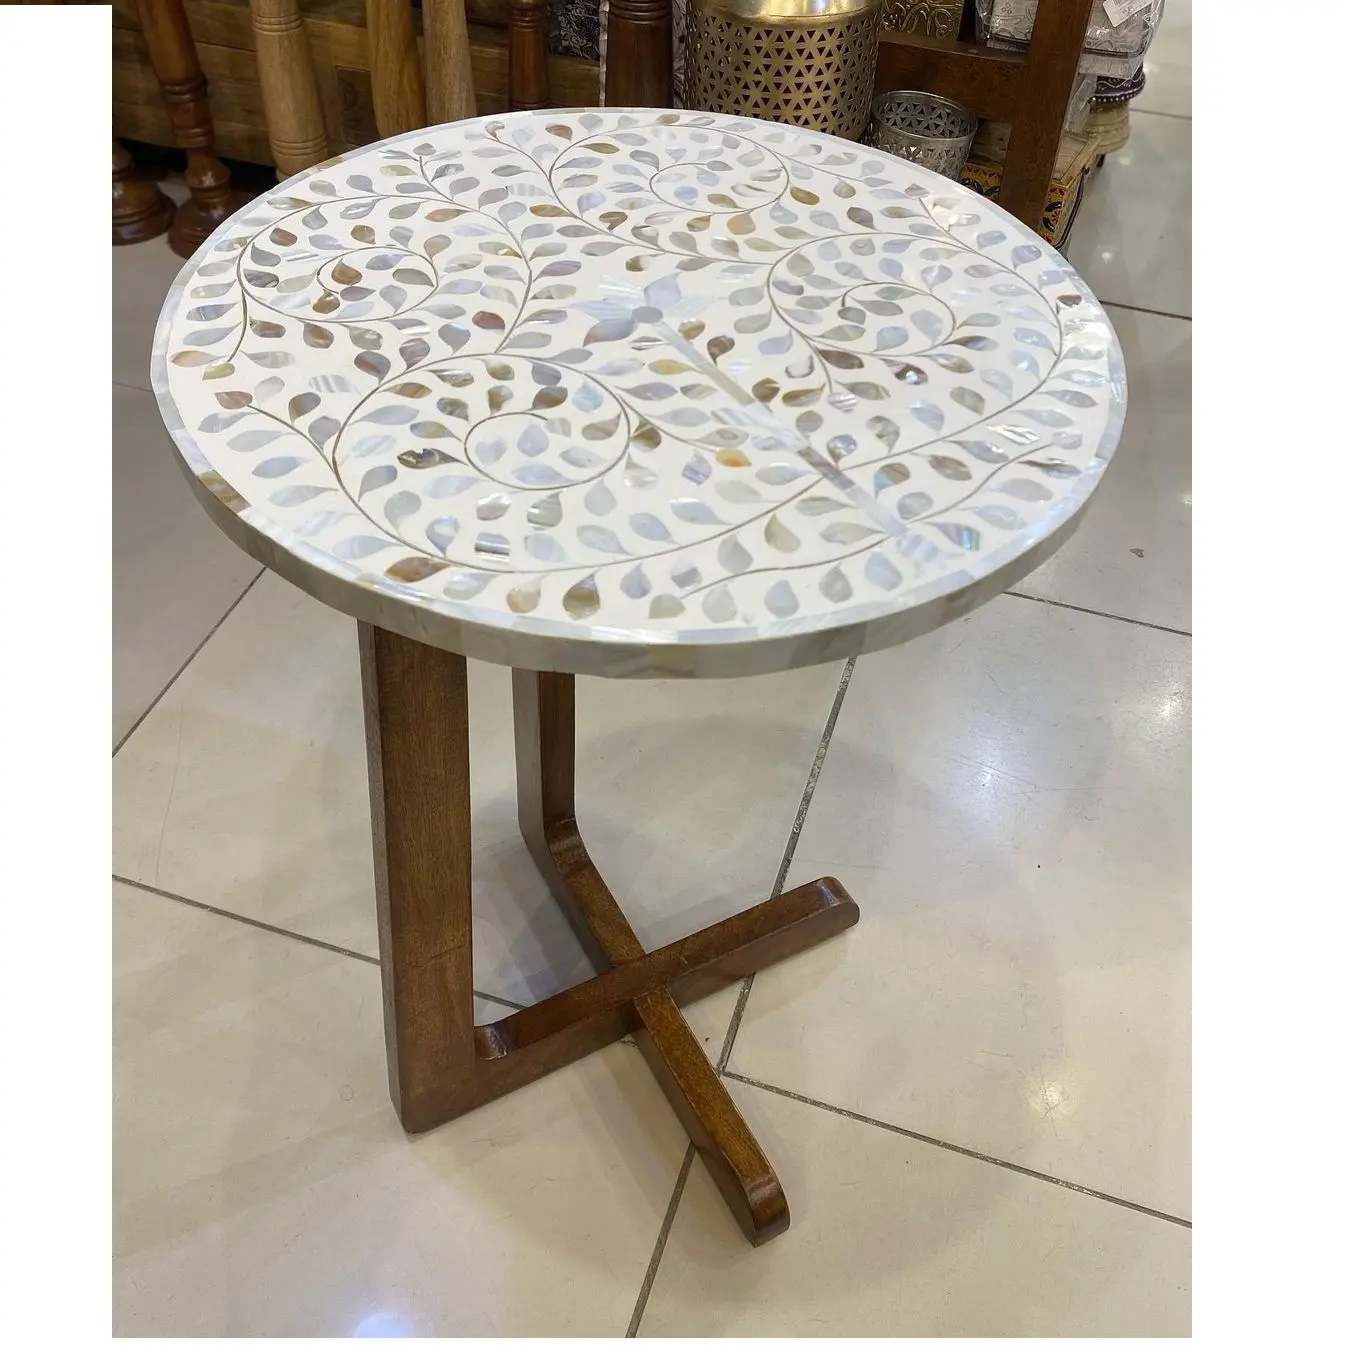 New design Round Mother of pearl Coffee Table Luxury Home Furniture Rustic Antique Modern